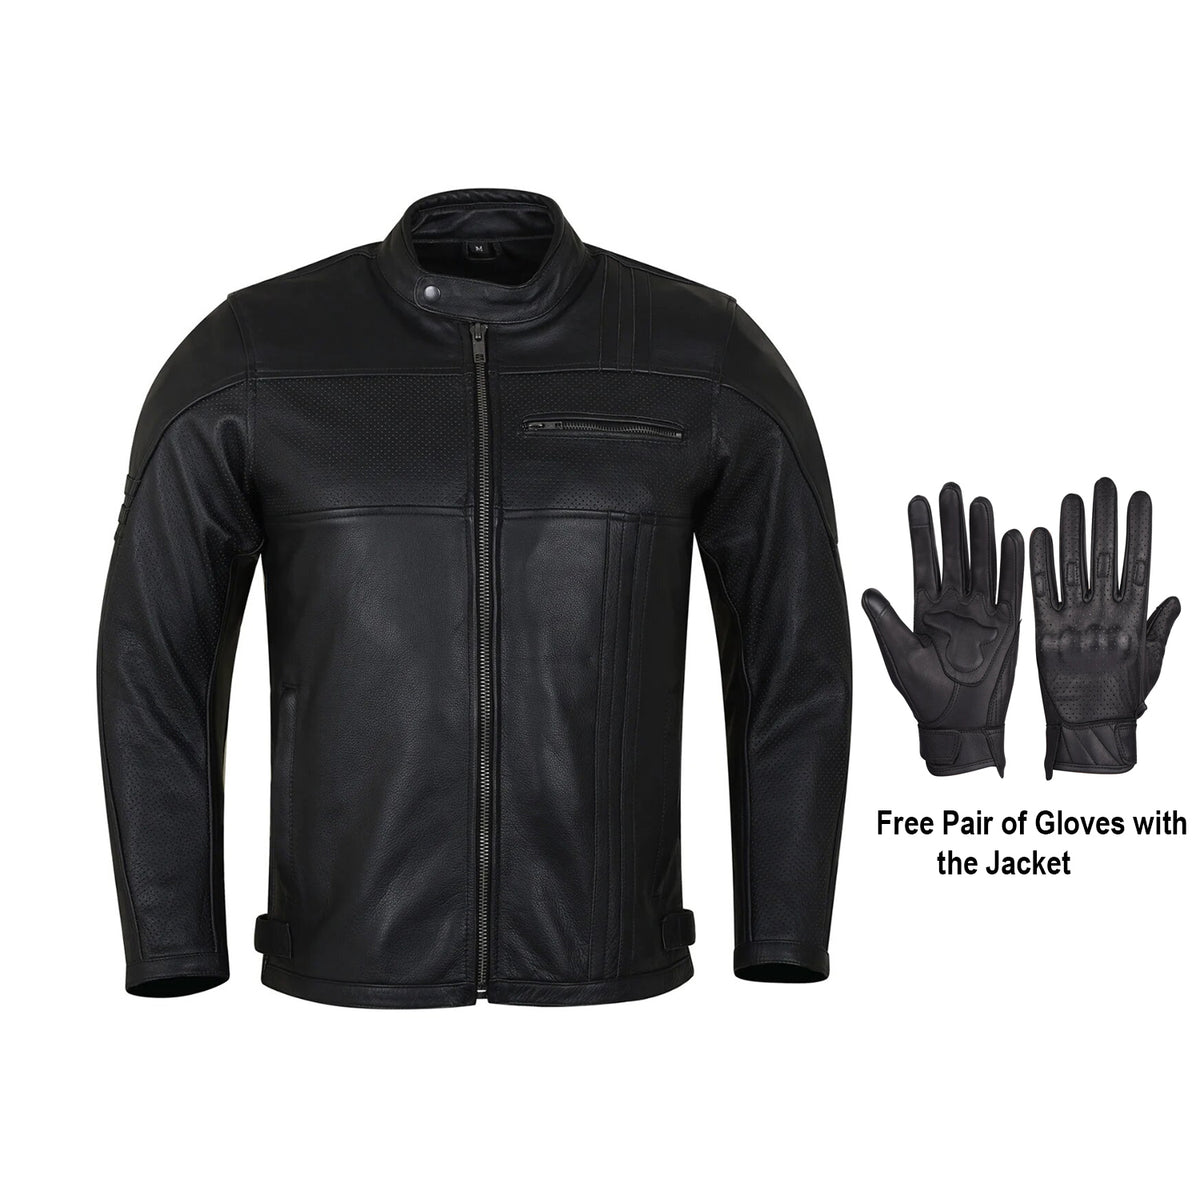 Men's Commuter Cafe Racer Motorcycle Leather Jacket with Armor